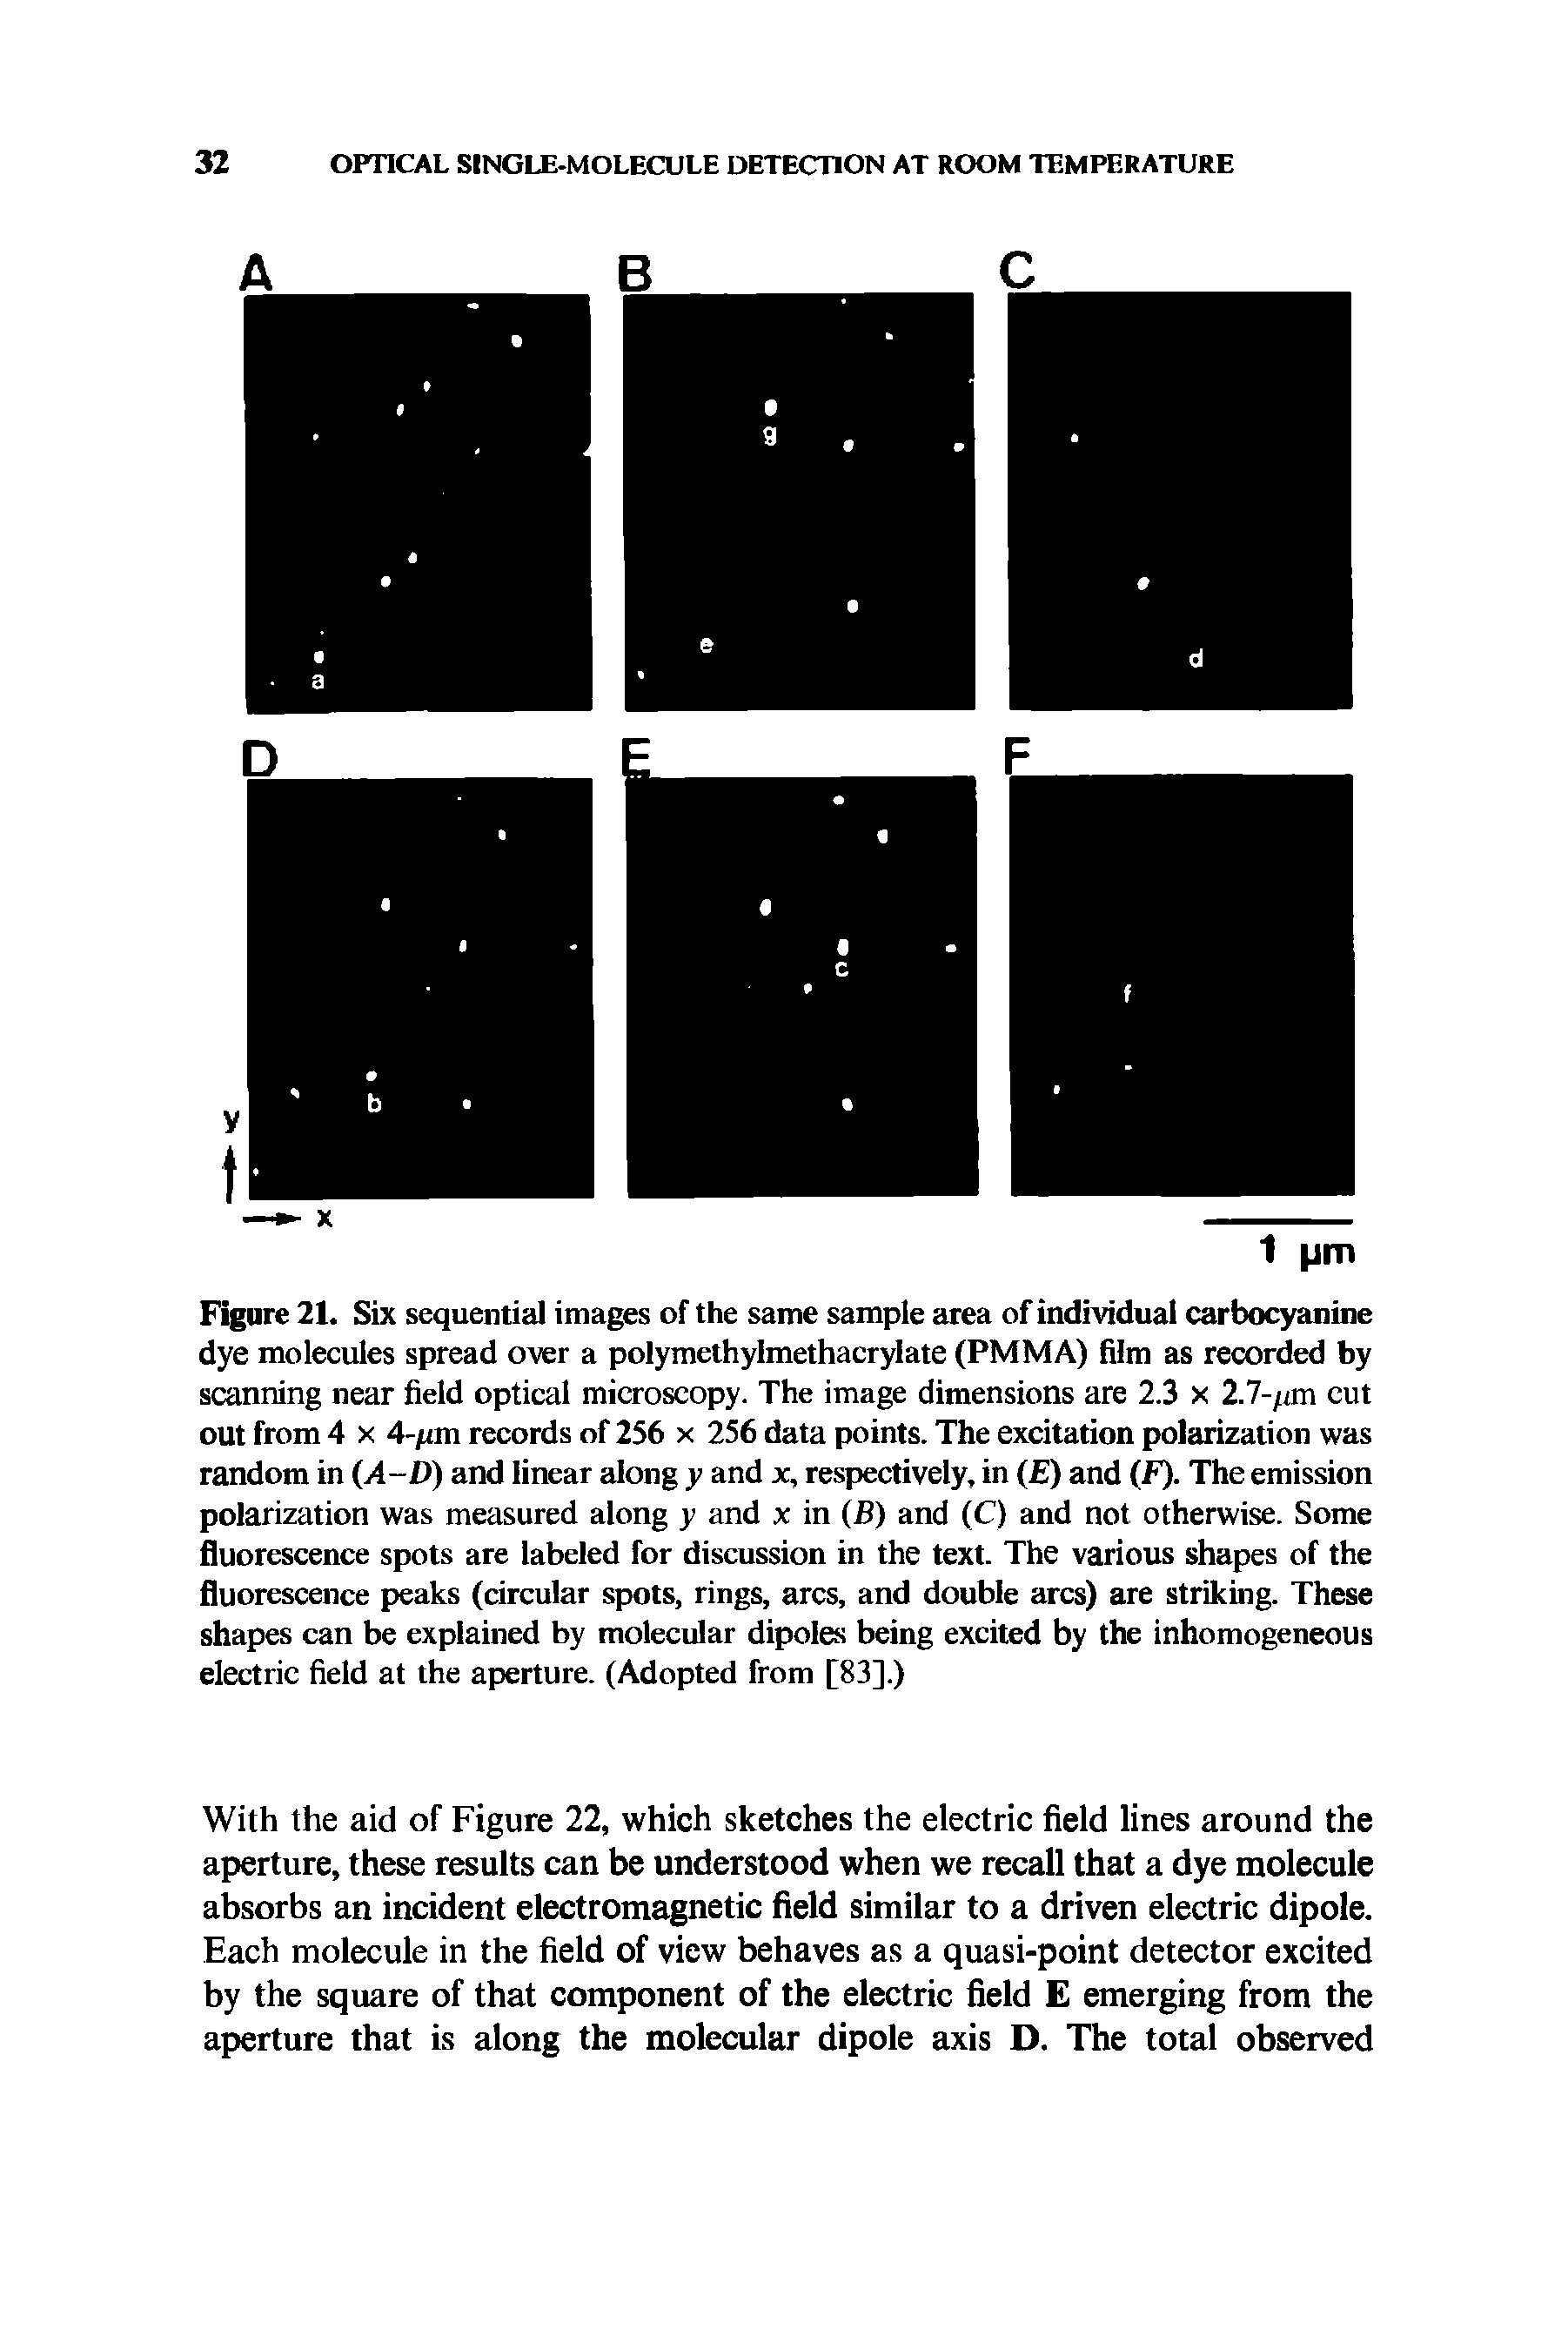 Figure 21. Six sequential images of the same sample area of individual carbocyanine dye molecules spread over a polymethylmethacrylate (PMMA) film as recorded by scanning near field optical microscopy. The image dimensions are 2.3 x 2.7-/nn cut out from 4 x 4-fim records of 256 x 256 data points. The excitation polarization was random in (A-D) and linear along y and x, respectively, in ( ) and (F). The emission polarization was measured along y and x in (B) and (C) and not otherwise. Some fluorescence spots are labeled for discussion in the text. The various shapes of the fluorescence peaks (circular spots, rings, arcs, and double arcs) are striking. These shapes can be explained by molecular dipoles being excited by the inhomogeneous electric field at the aperture. (Adopted from [83].)...